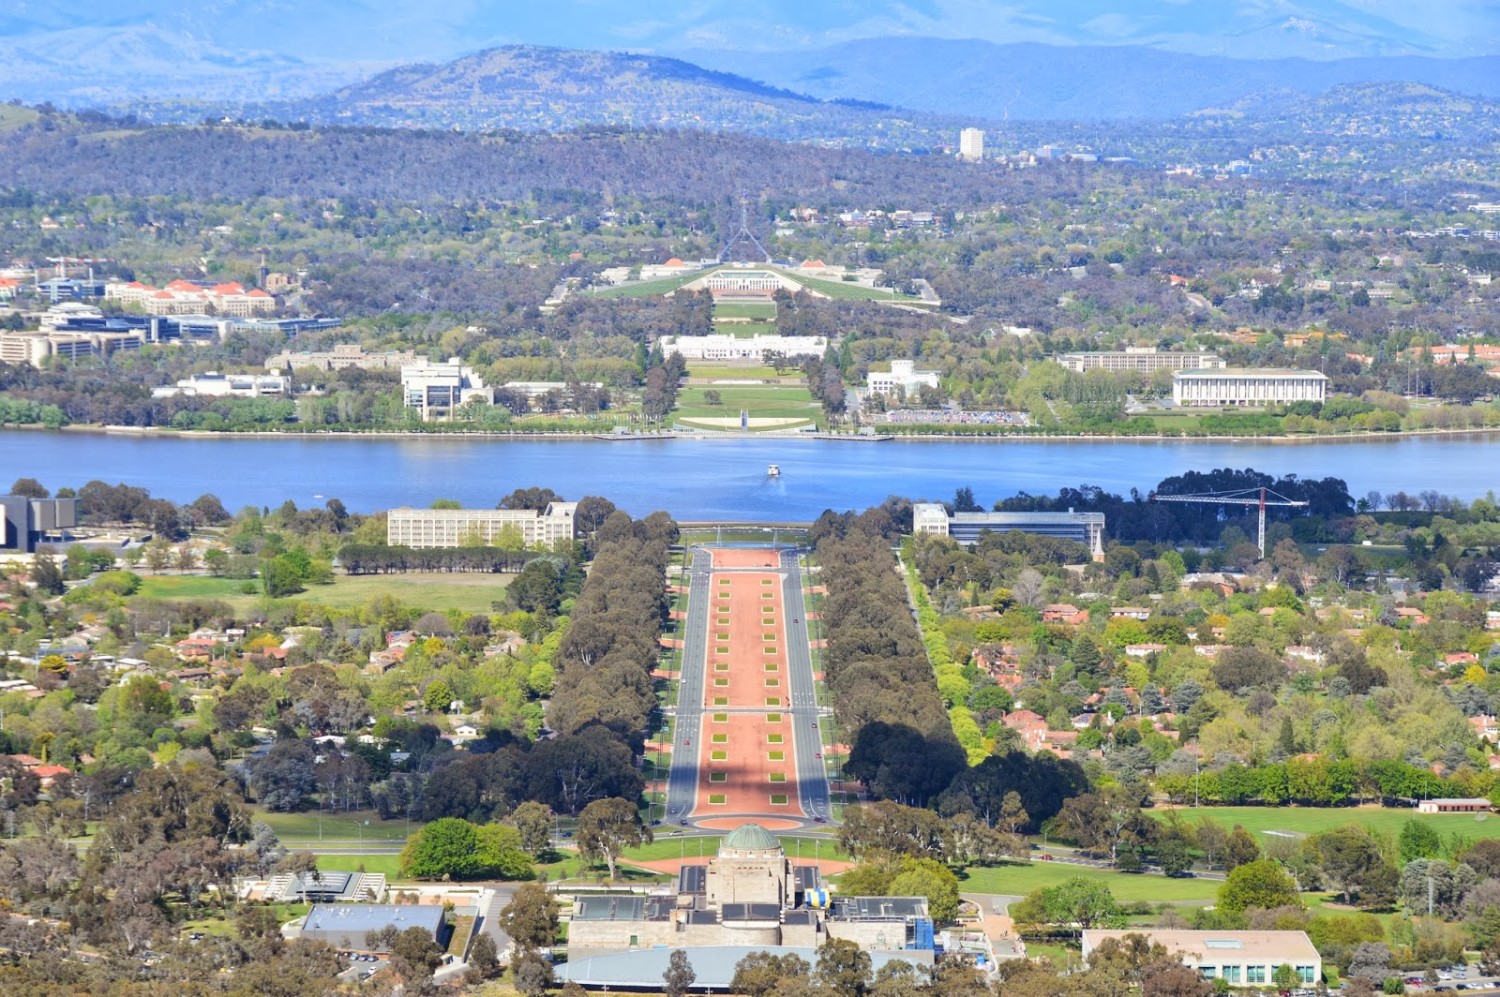 4. Canberra Panorama